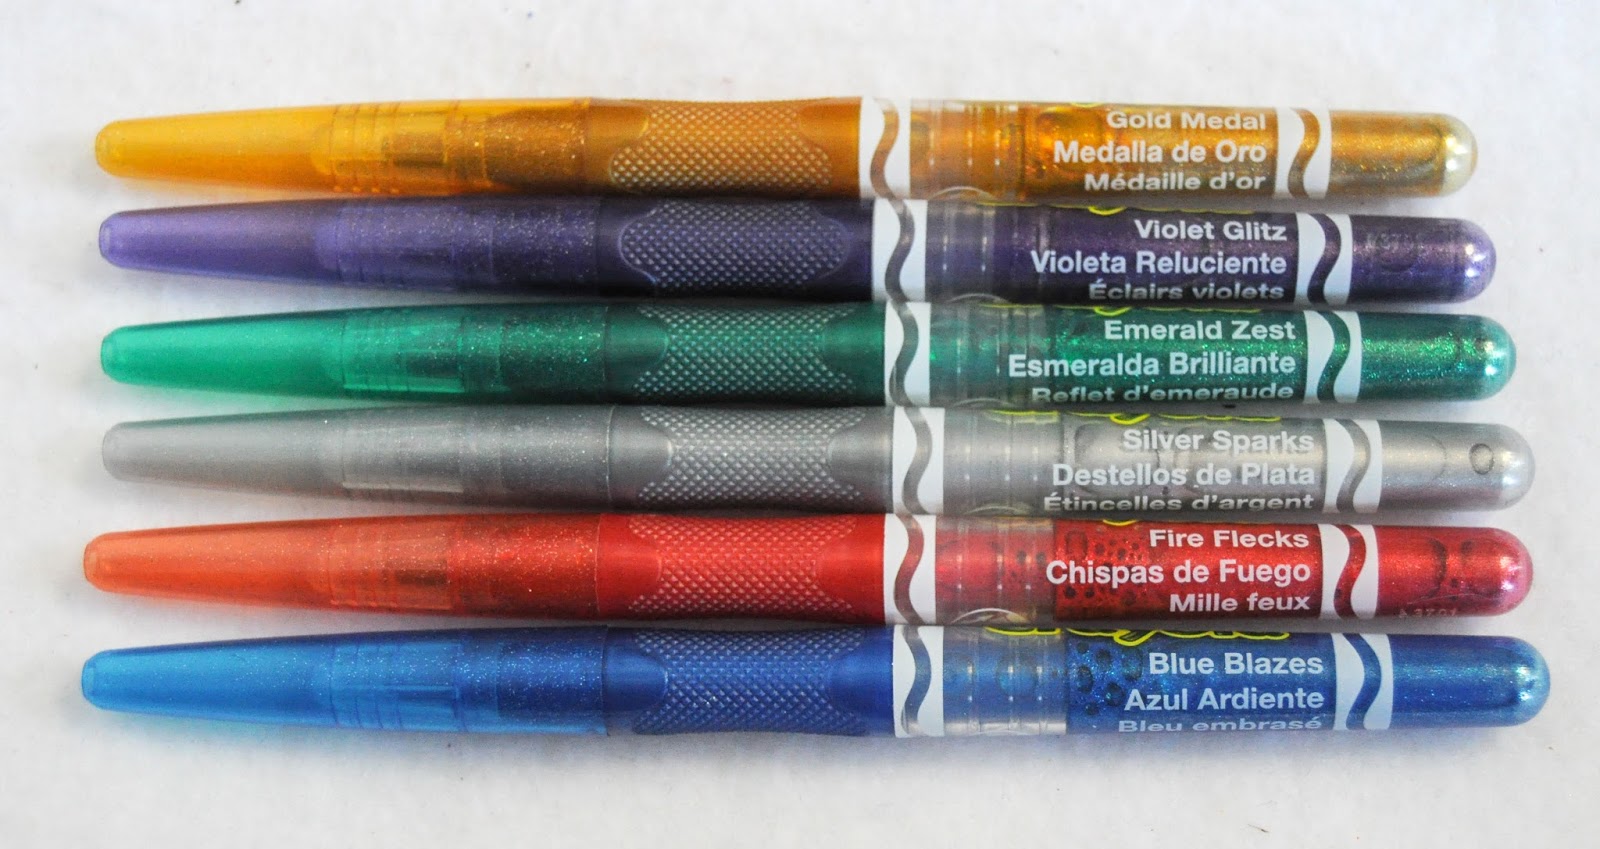 6 Count Crayola Glitter Markers: What's Inside the Box